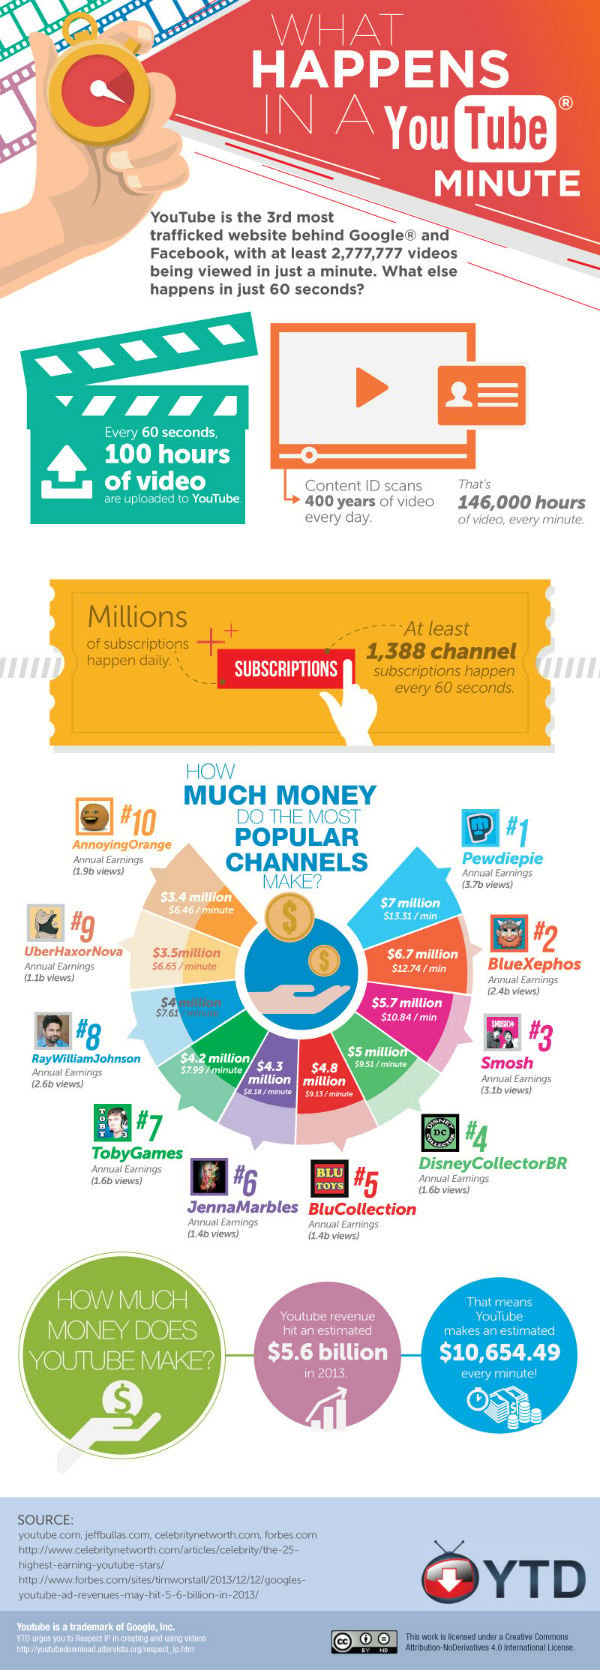 youtube-social-media-facts-infographic.jpg